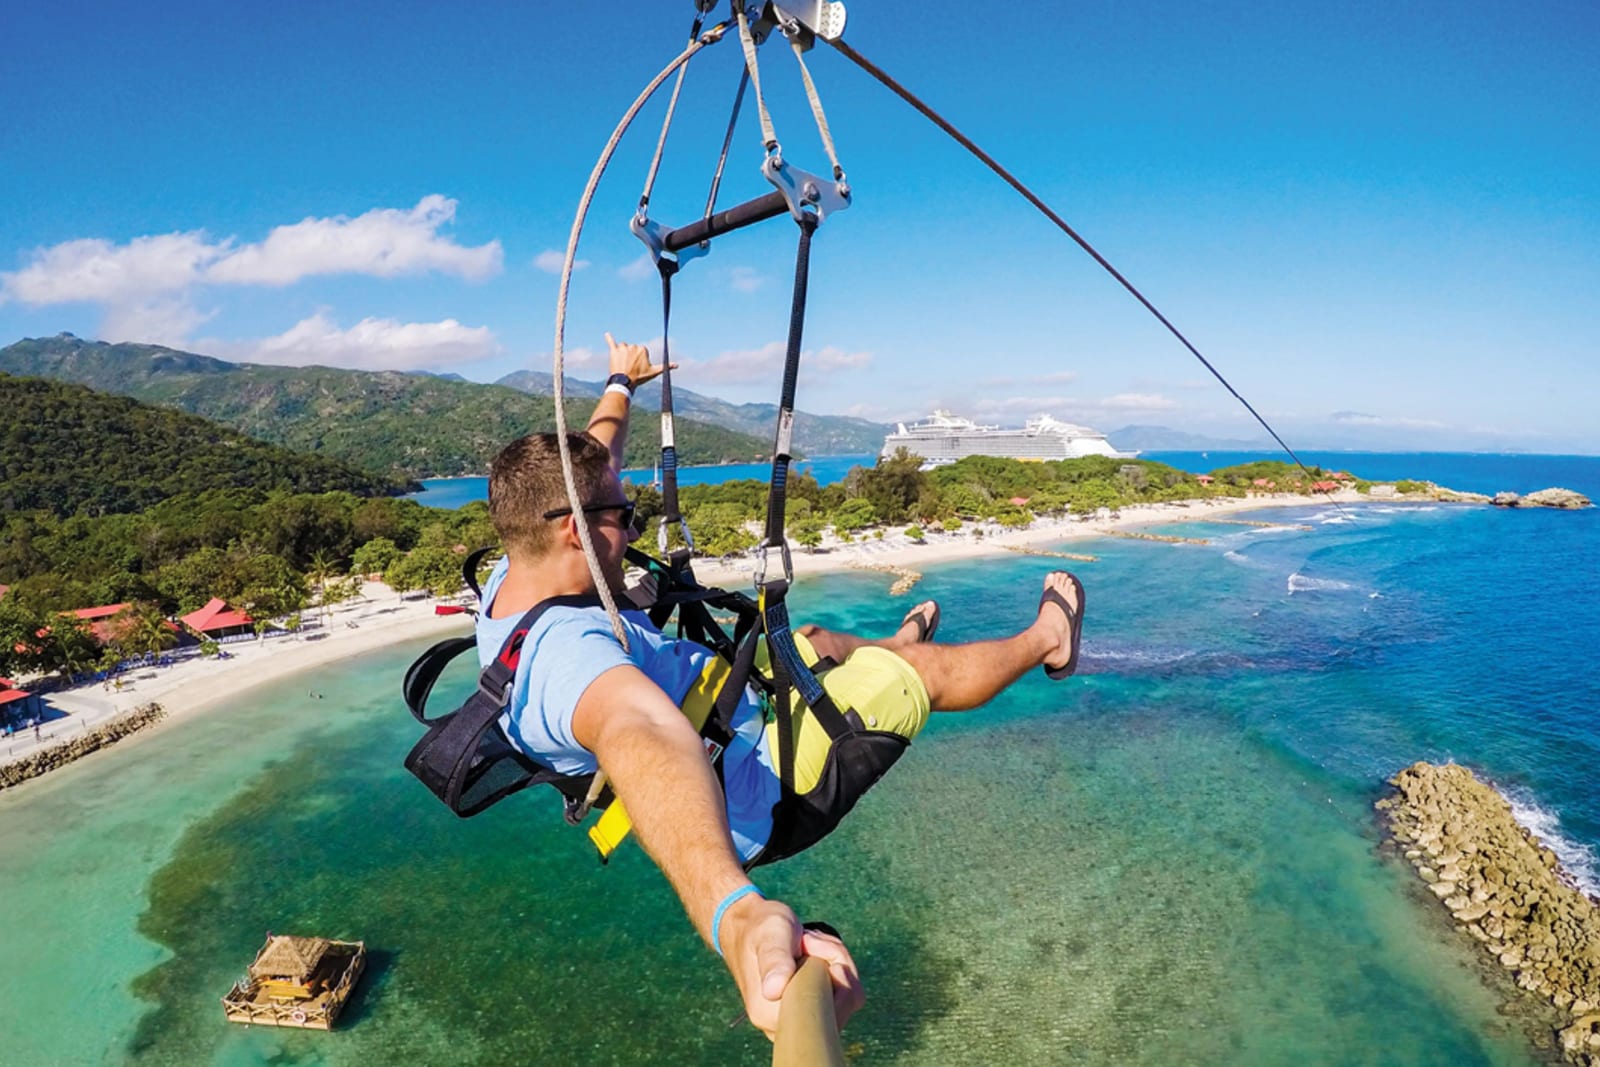 A cruise passengers riding the zipline at Labadee, a private island destination owened by Royal Caribbean International